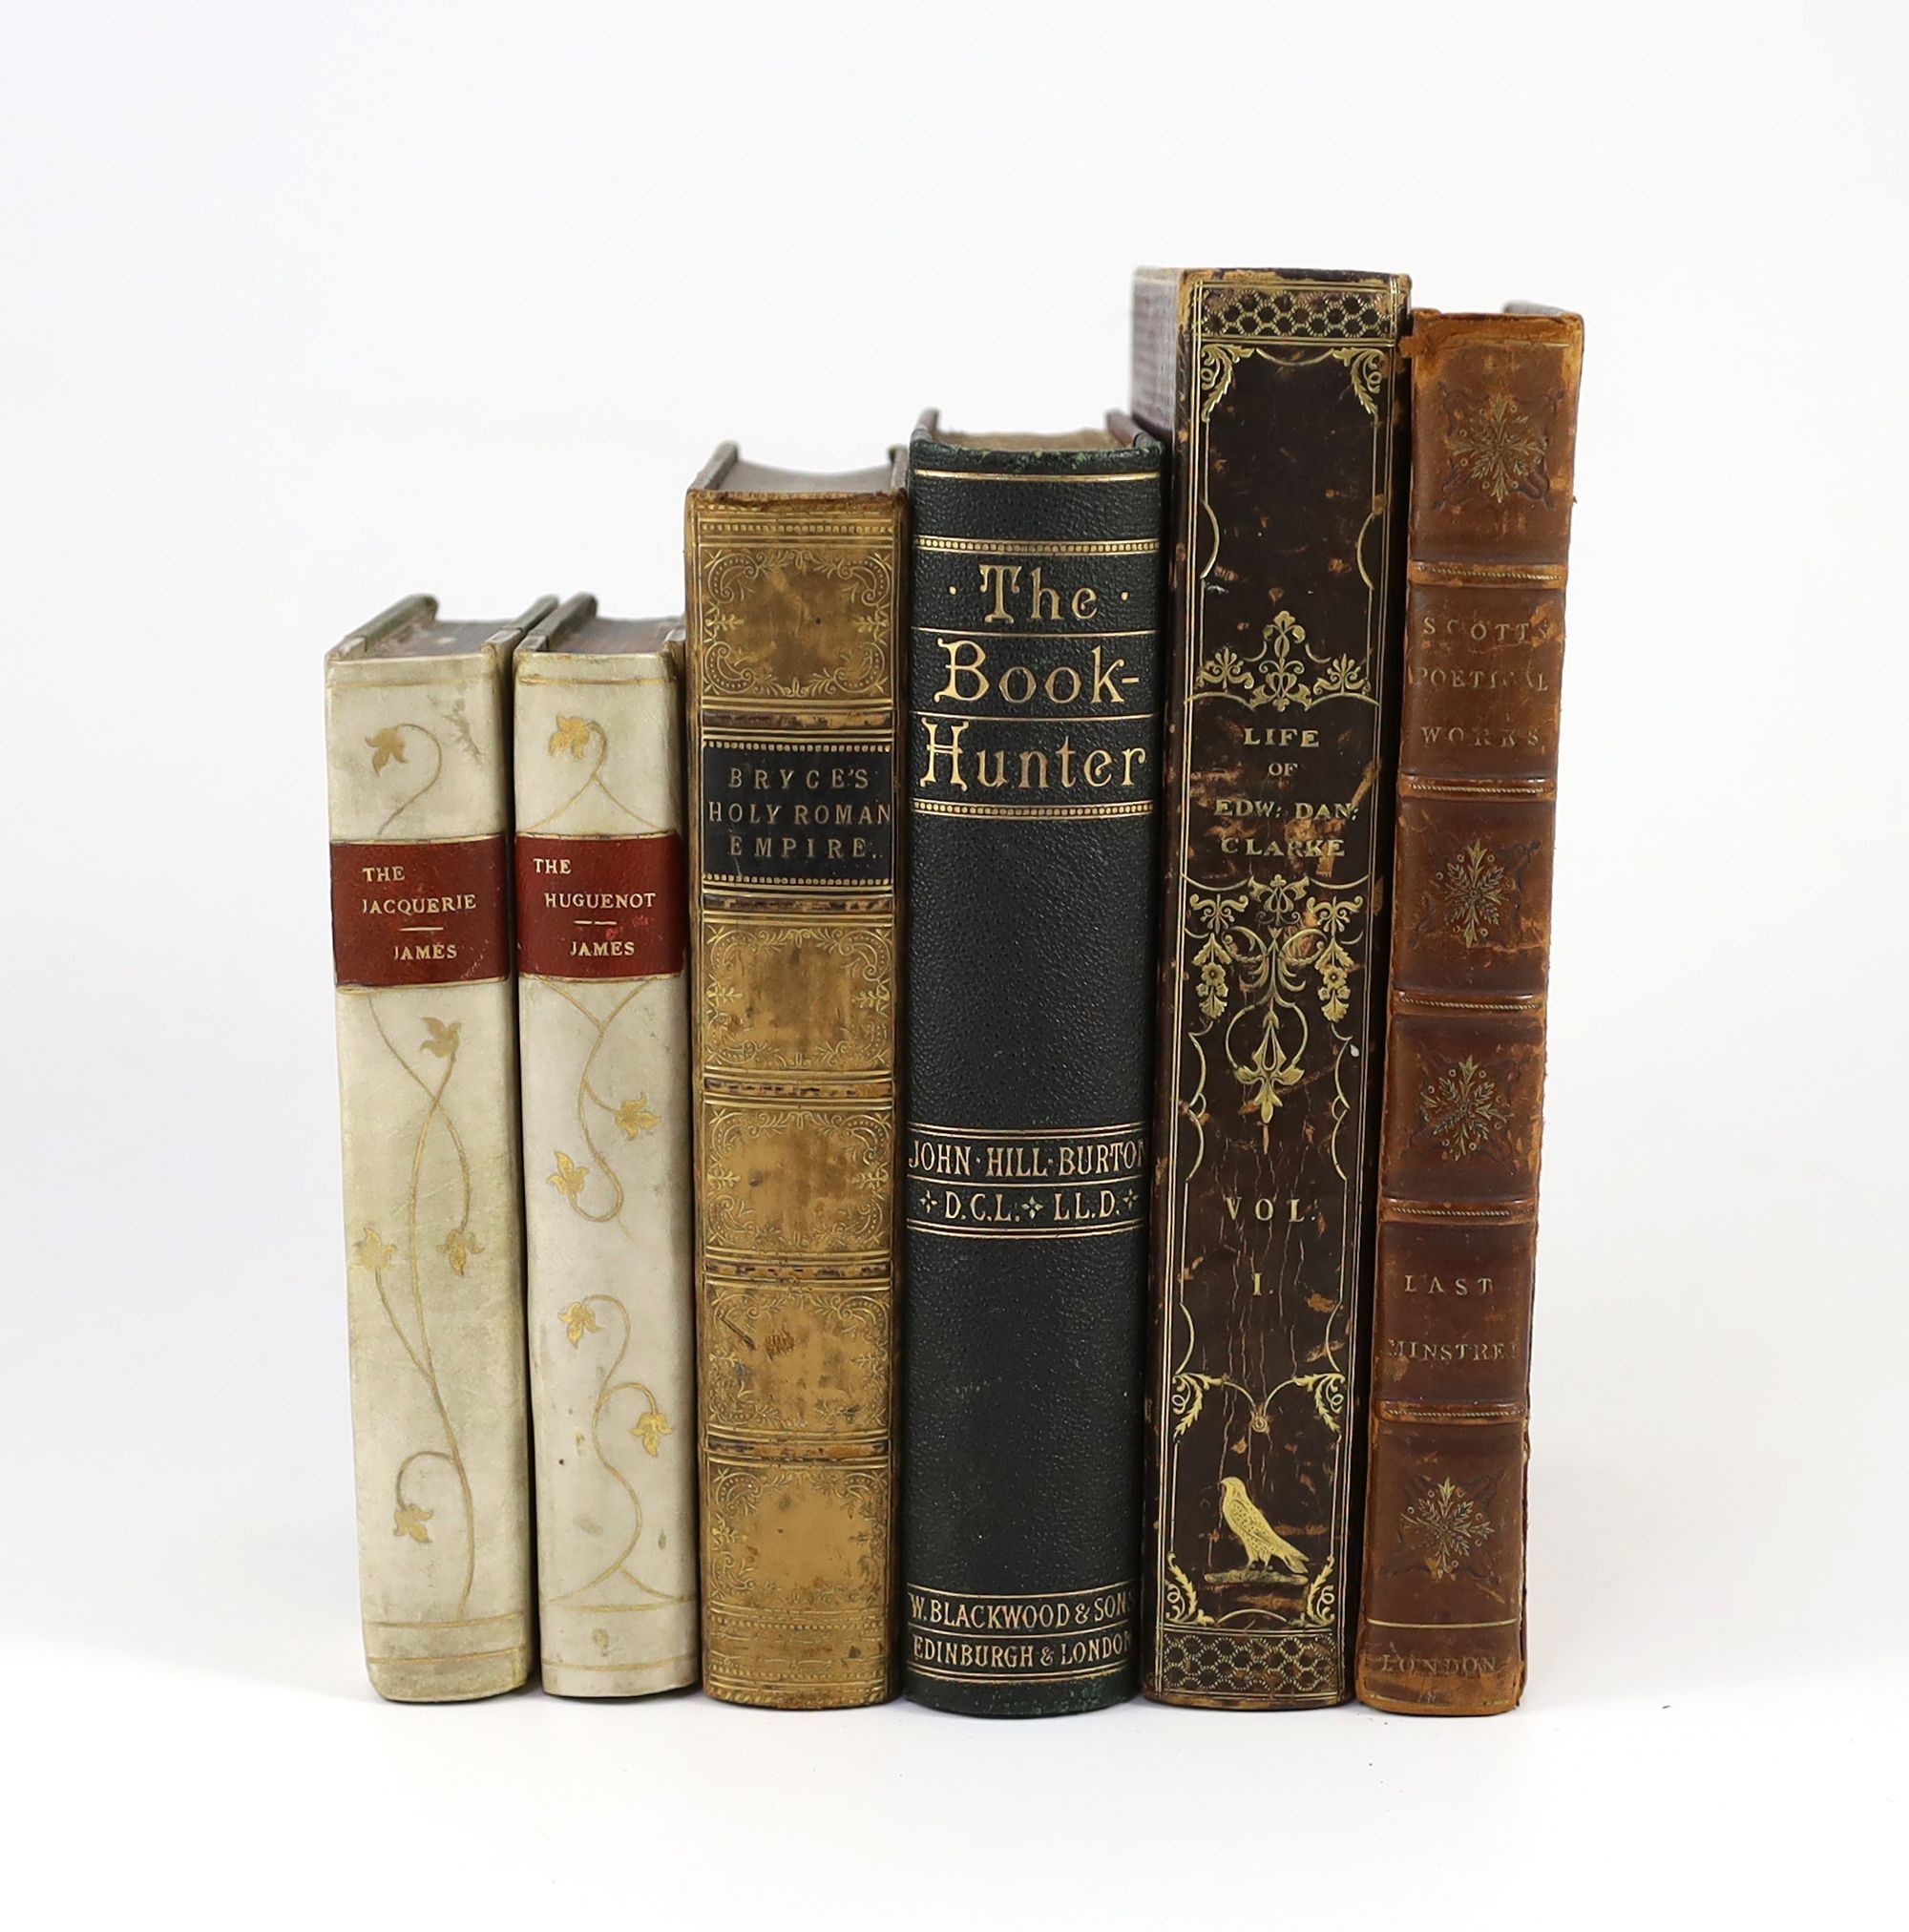 Various 19th century works, including; James, G. P. R - The Jacquerie [and] The Huguenot - 2 works. Both in quarter vellum and cloth with morocco labels and gilt decorations on spine. Marbles edges. 8vo. Simms and M’inty